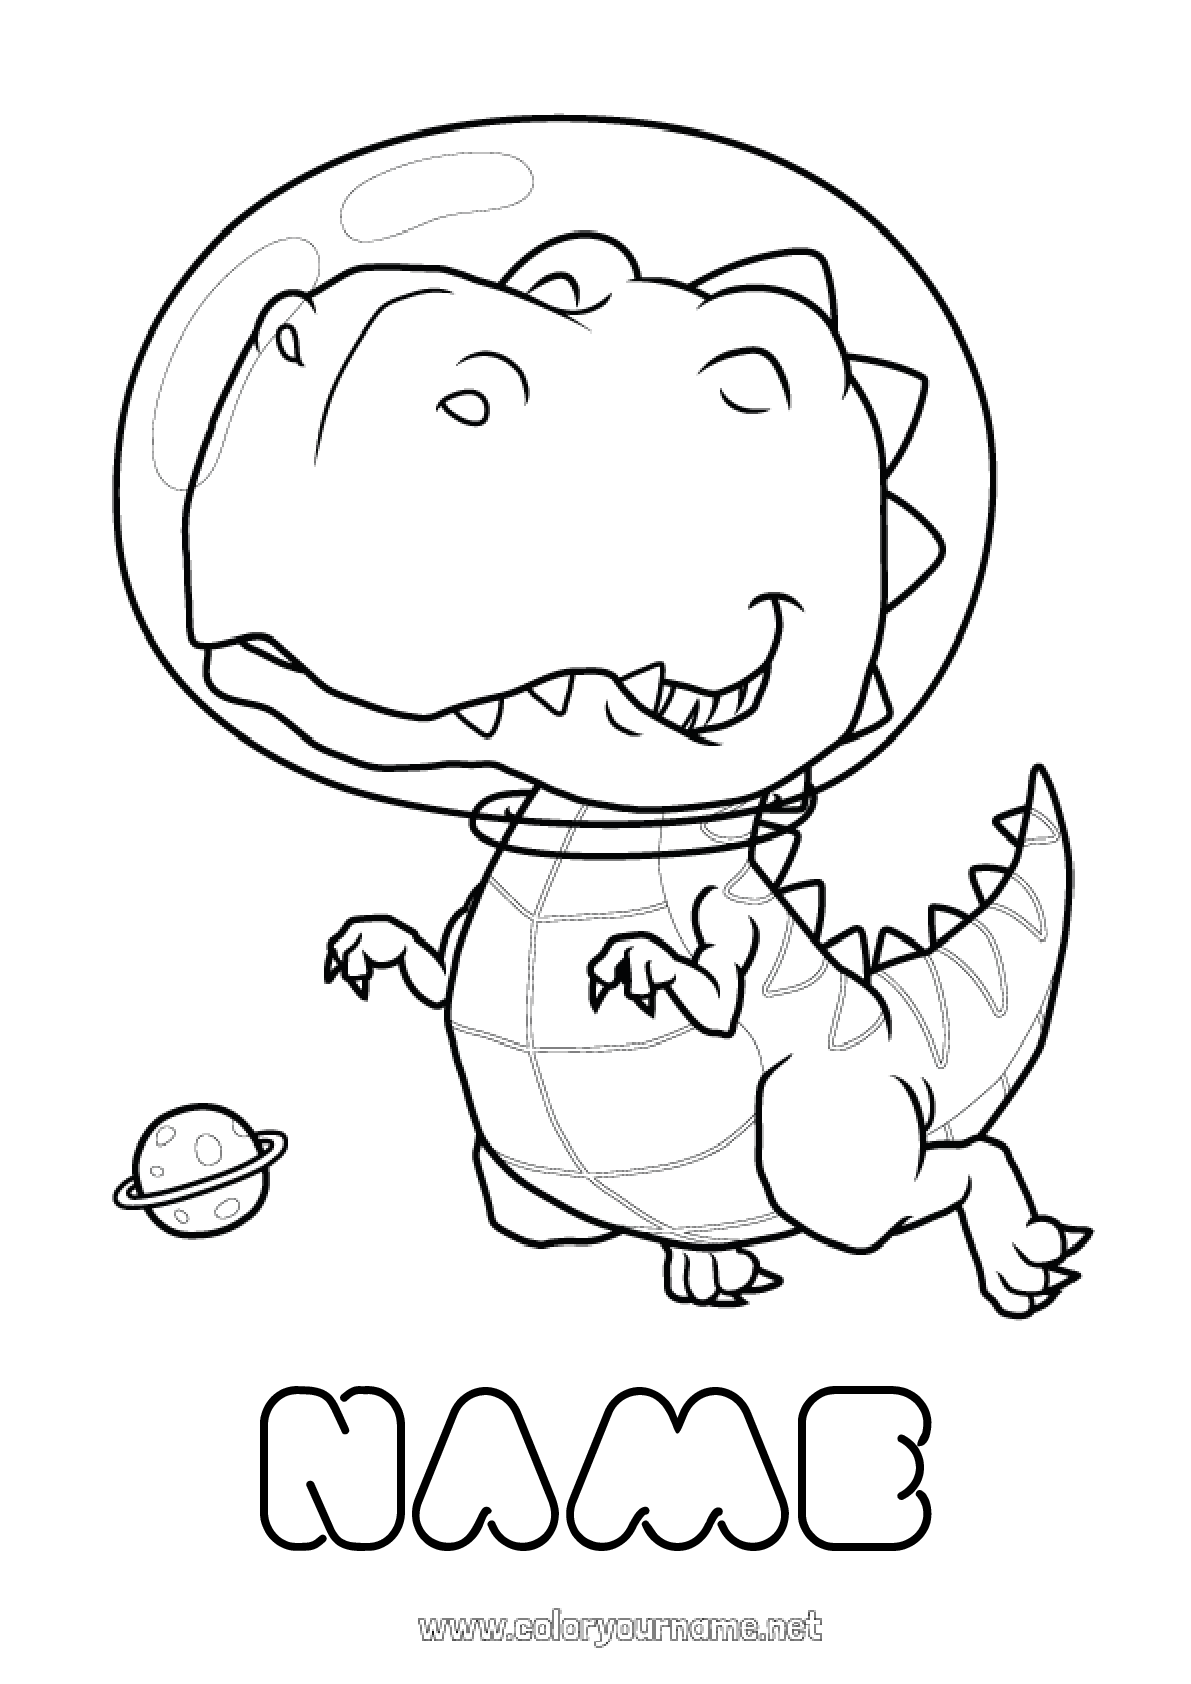 Coloring page No.1631 - Dinosaurs Space Astronaut